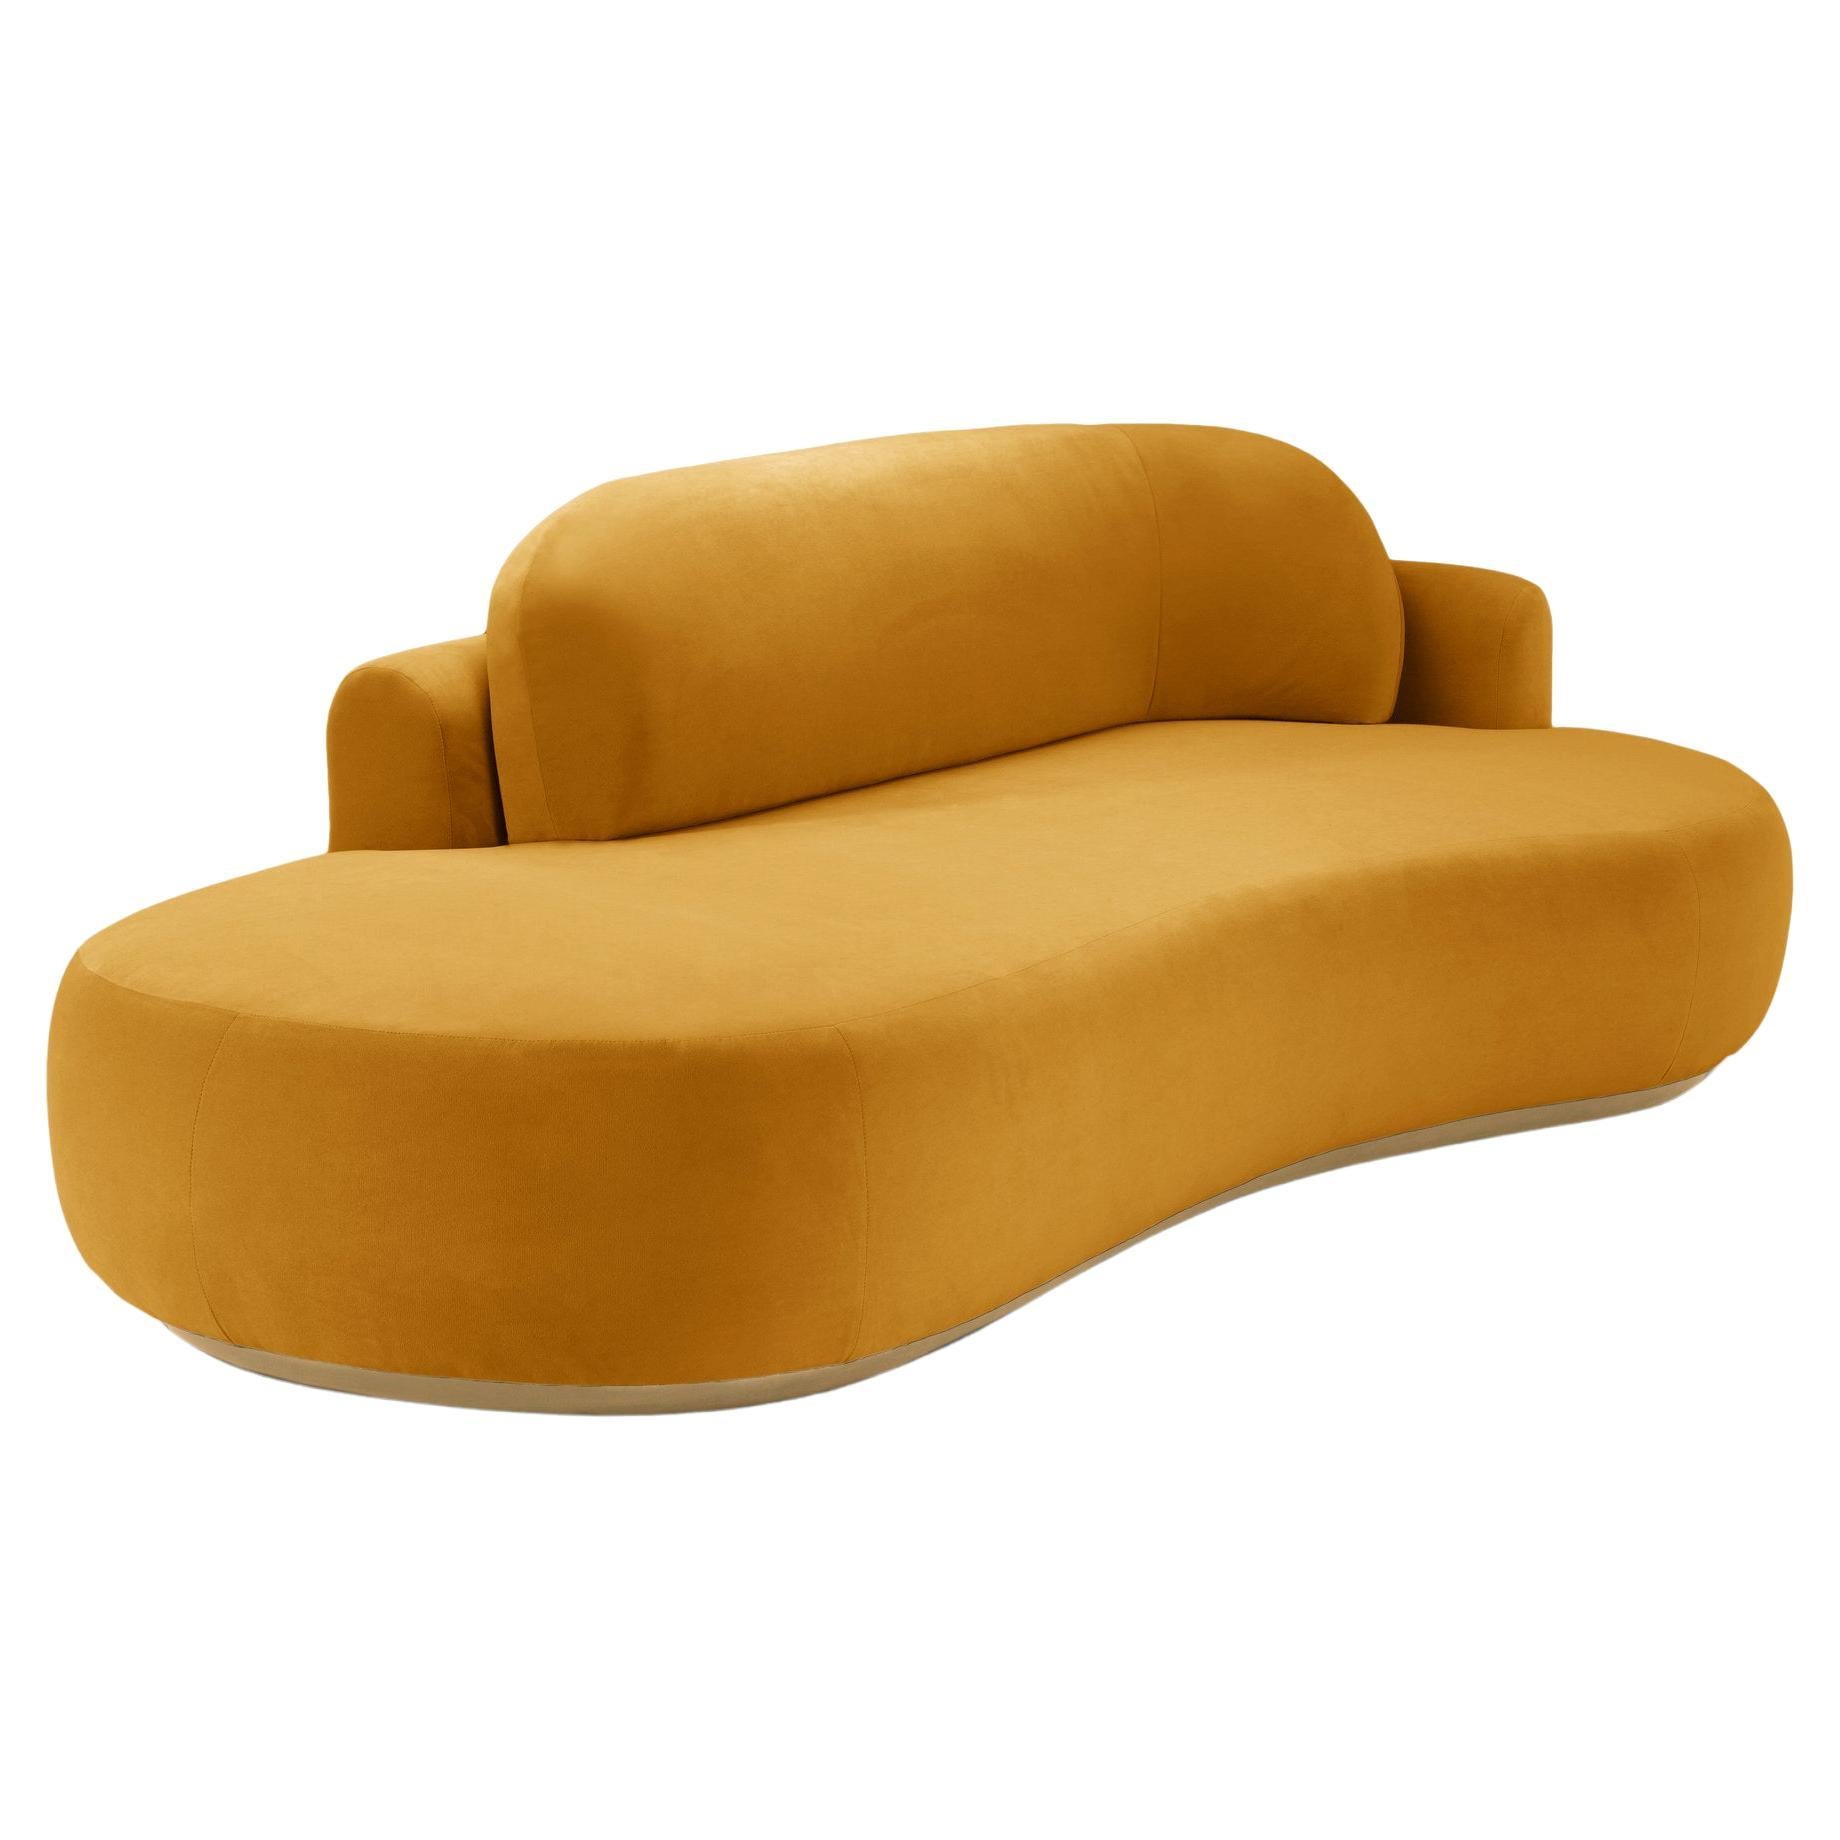 Naked Curved Sofa Single with Natural Oak and Corn For Sale